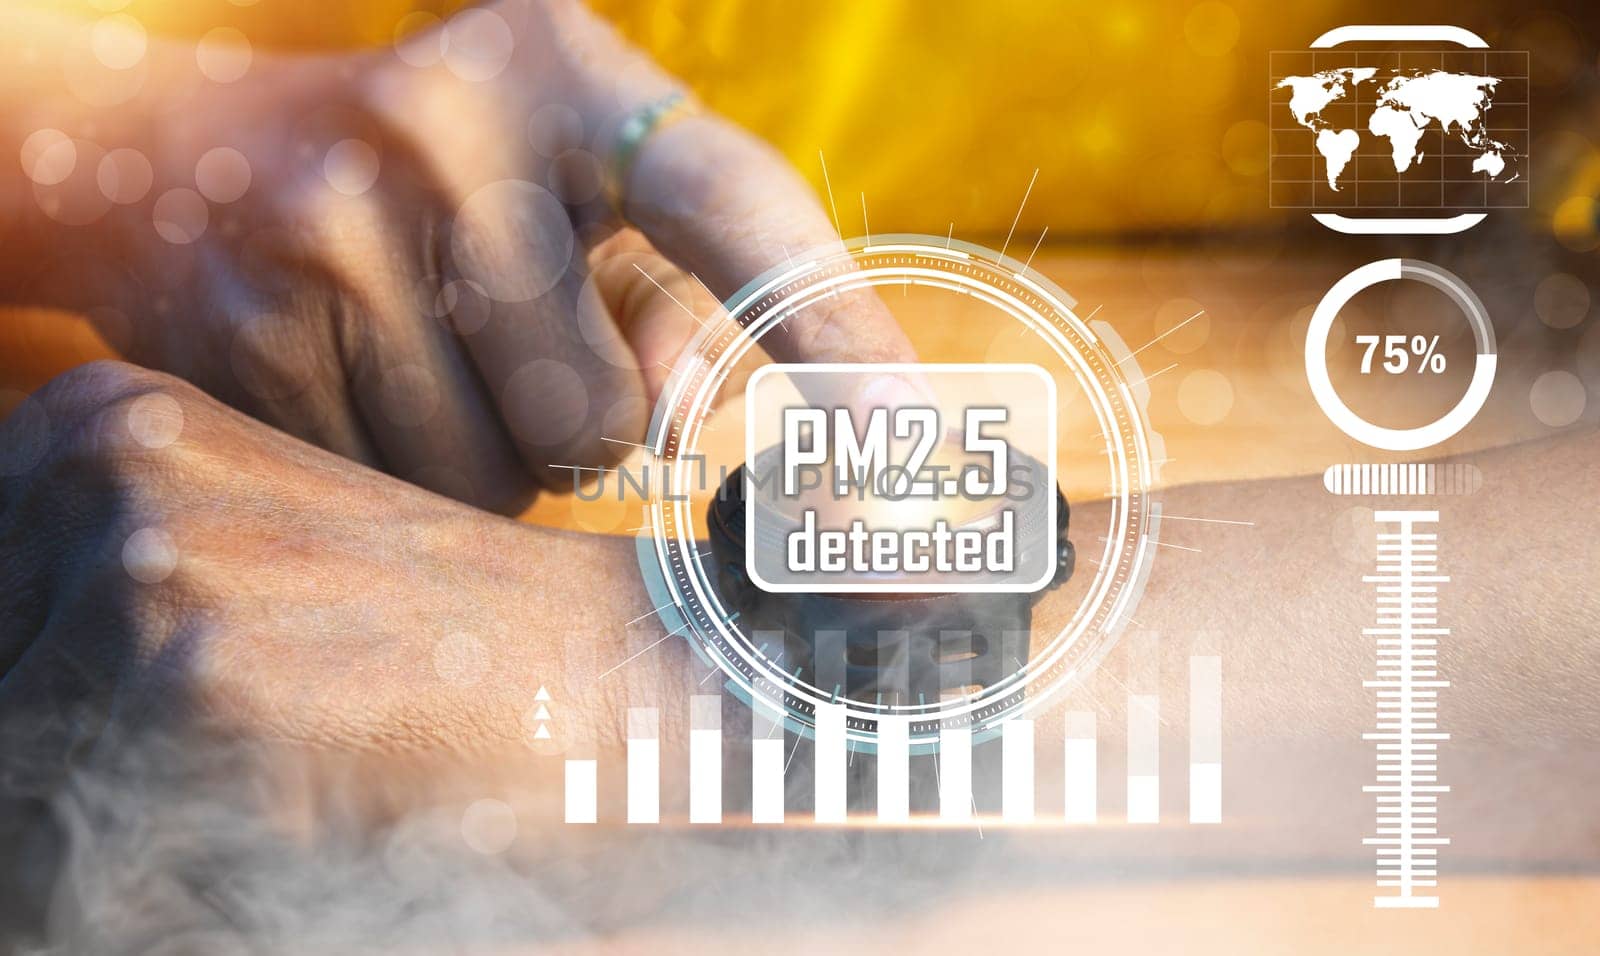 The concept of using smartwatch devices in detecting PM2.5 dust in the air by boonruen